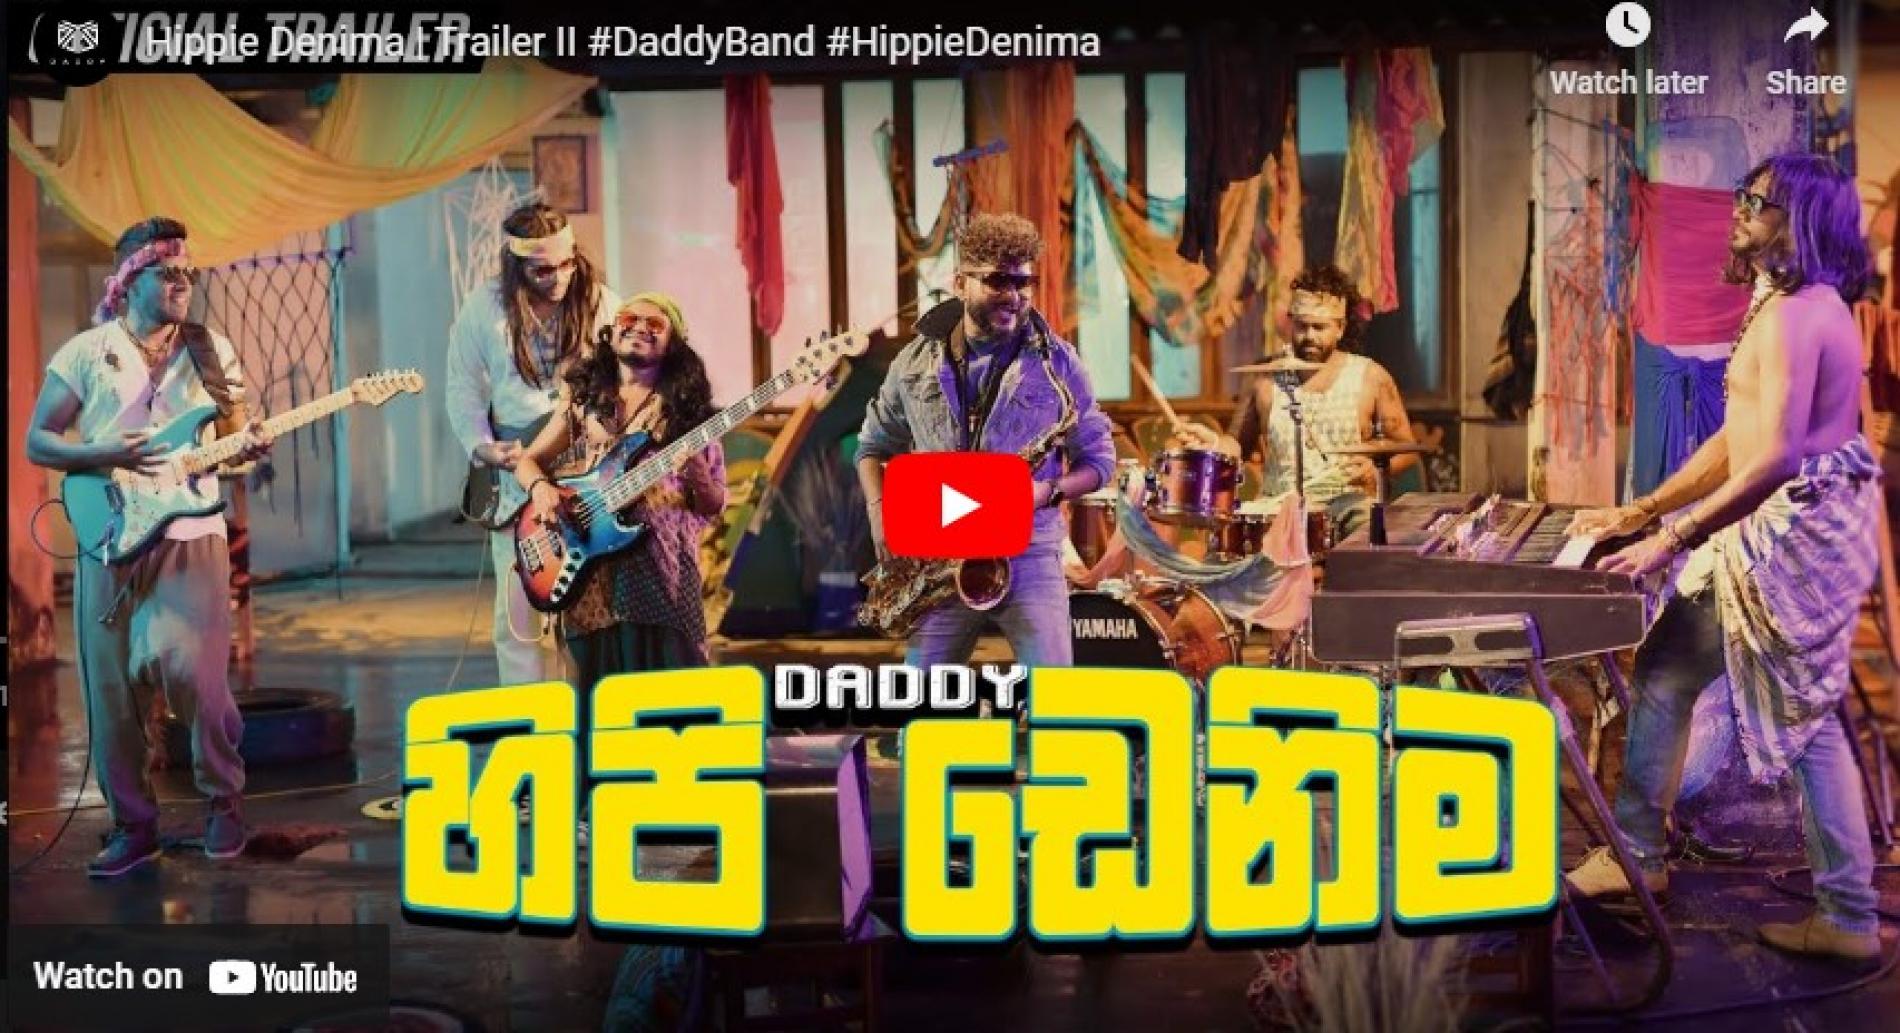 Incoming : Hippie Denima | Trailer II By The Daddy Band